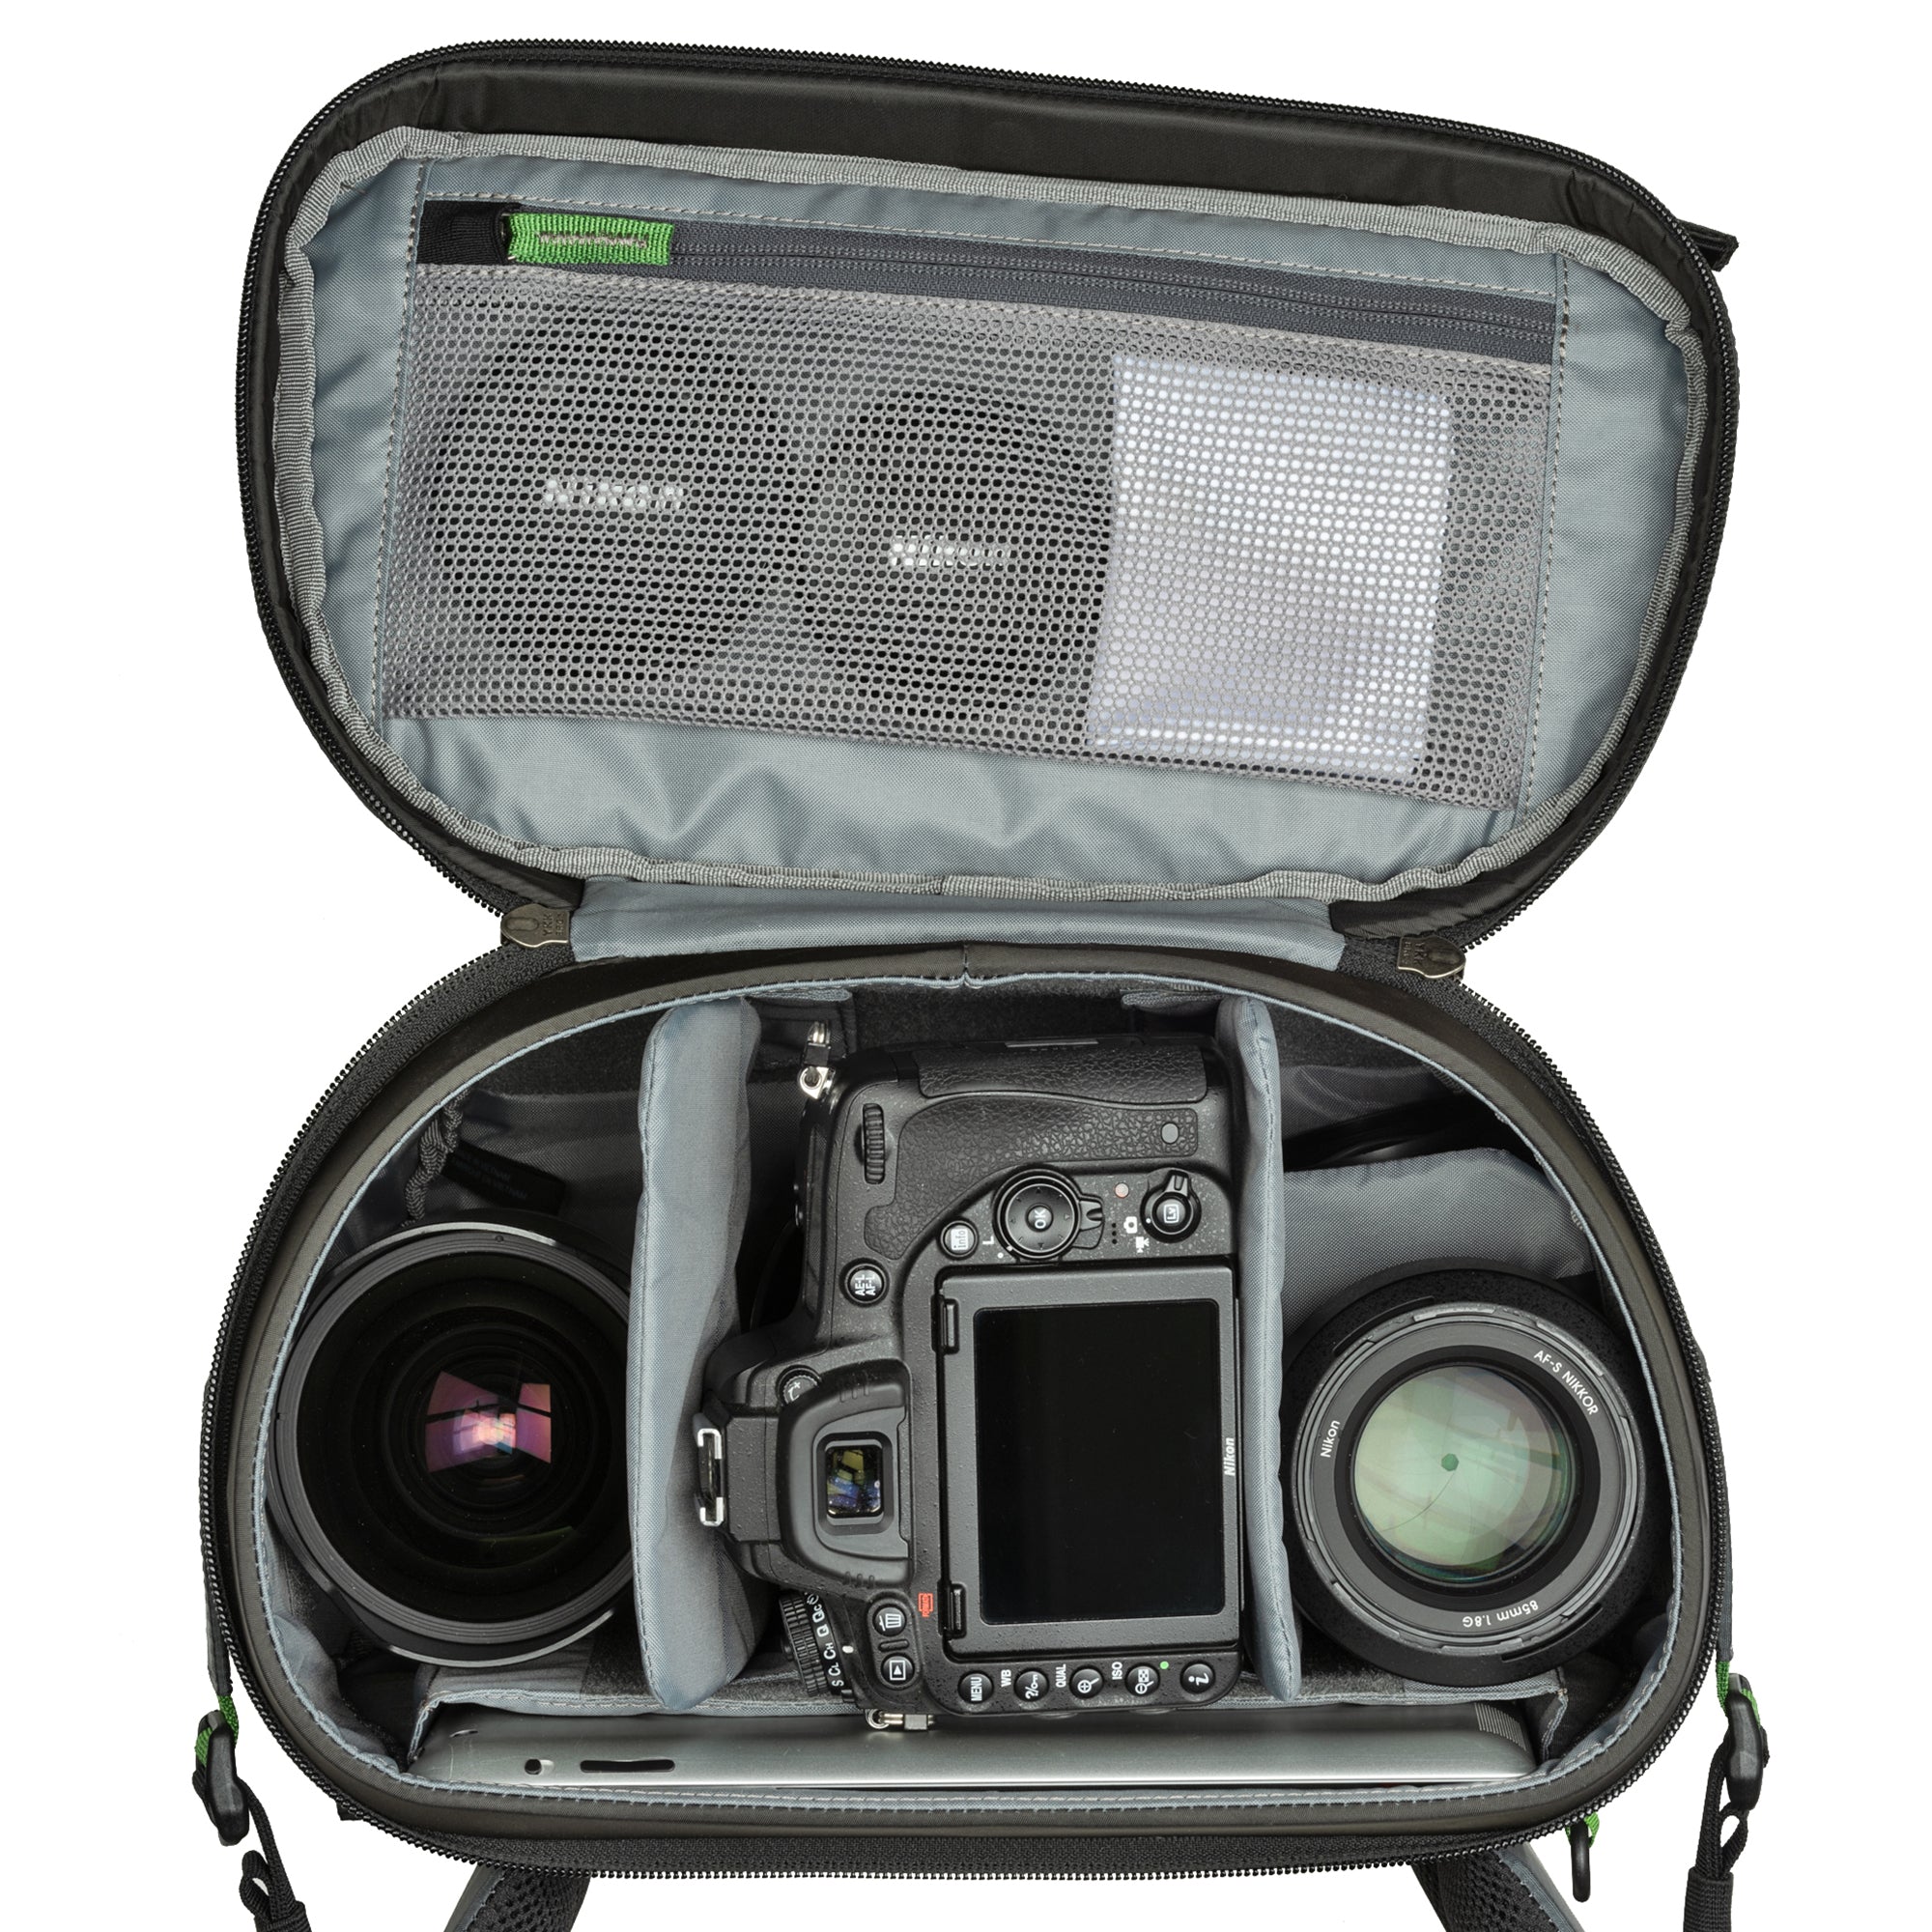 Fits one gripped Mirrorless or DSLR kit with 3-5 lenses or 70-200mm f/2.8 attached